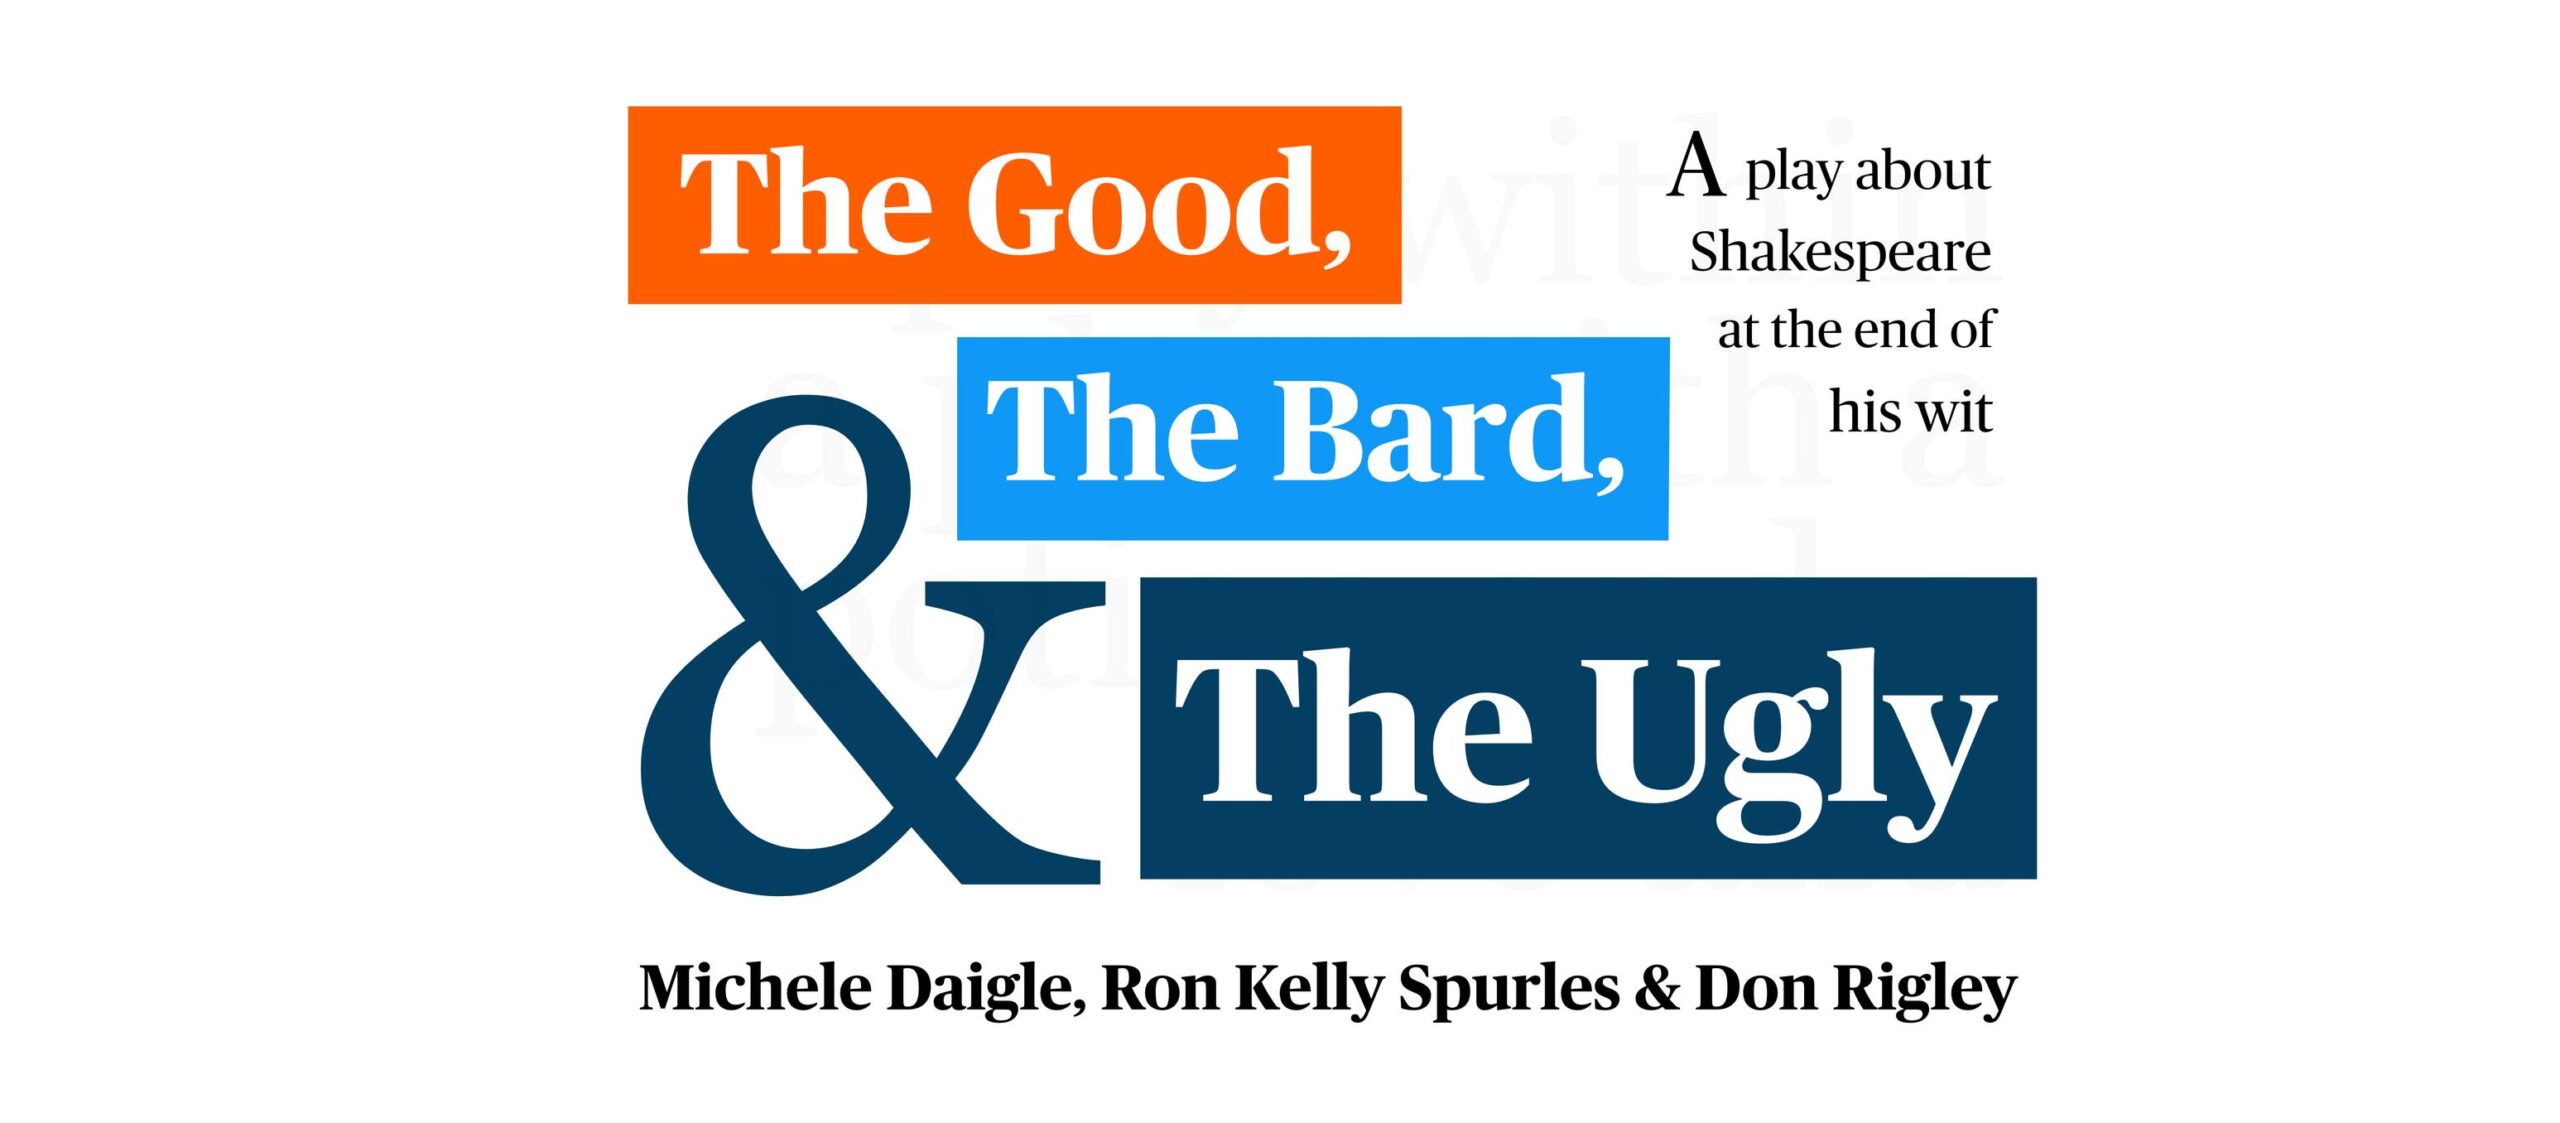 The Good, the Bard, and the Ugly. A play about Shakespeare at the end of his wit. Michele Daigle, Ron Kelly Spurles, and Don Rigley